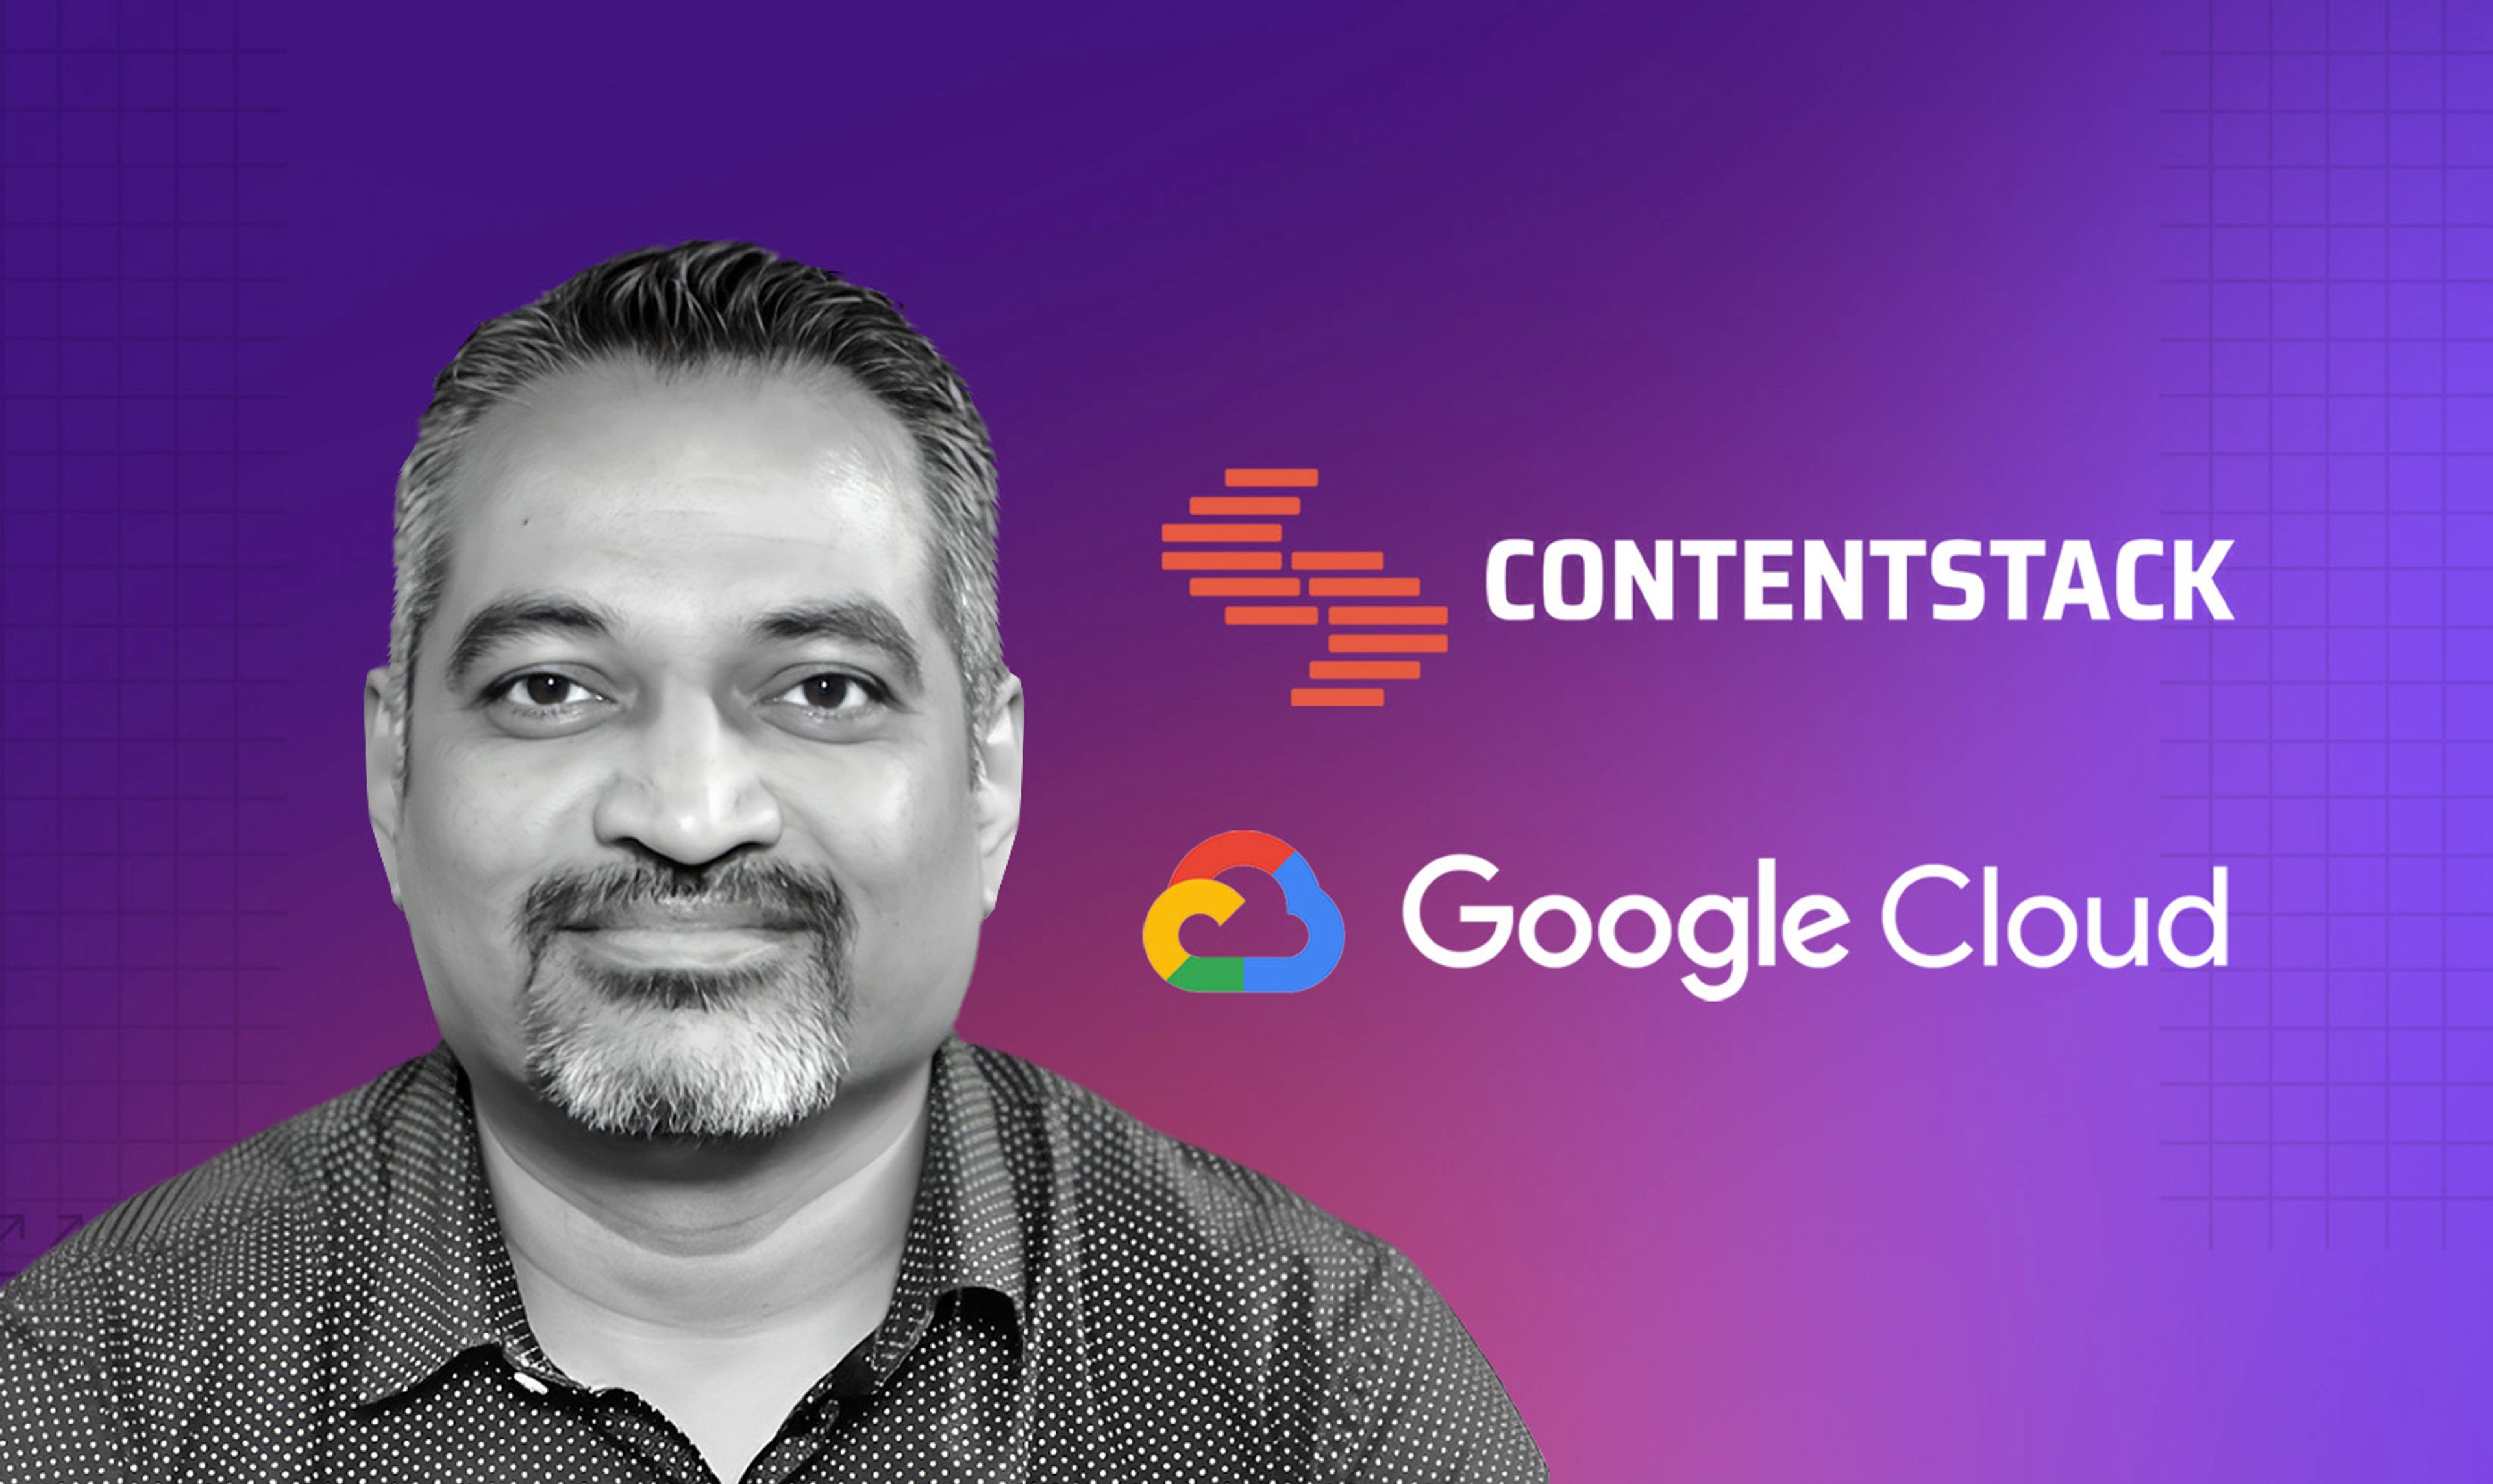 Headshot of Nishant Patel, CTO and founder of Contentstack, with logos of Contentstack and Google Cloud